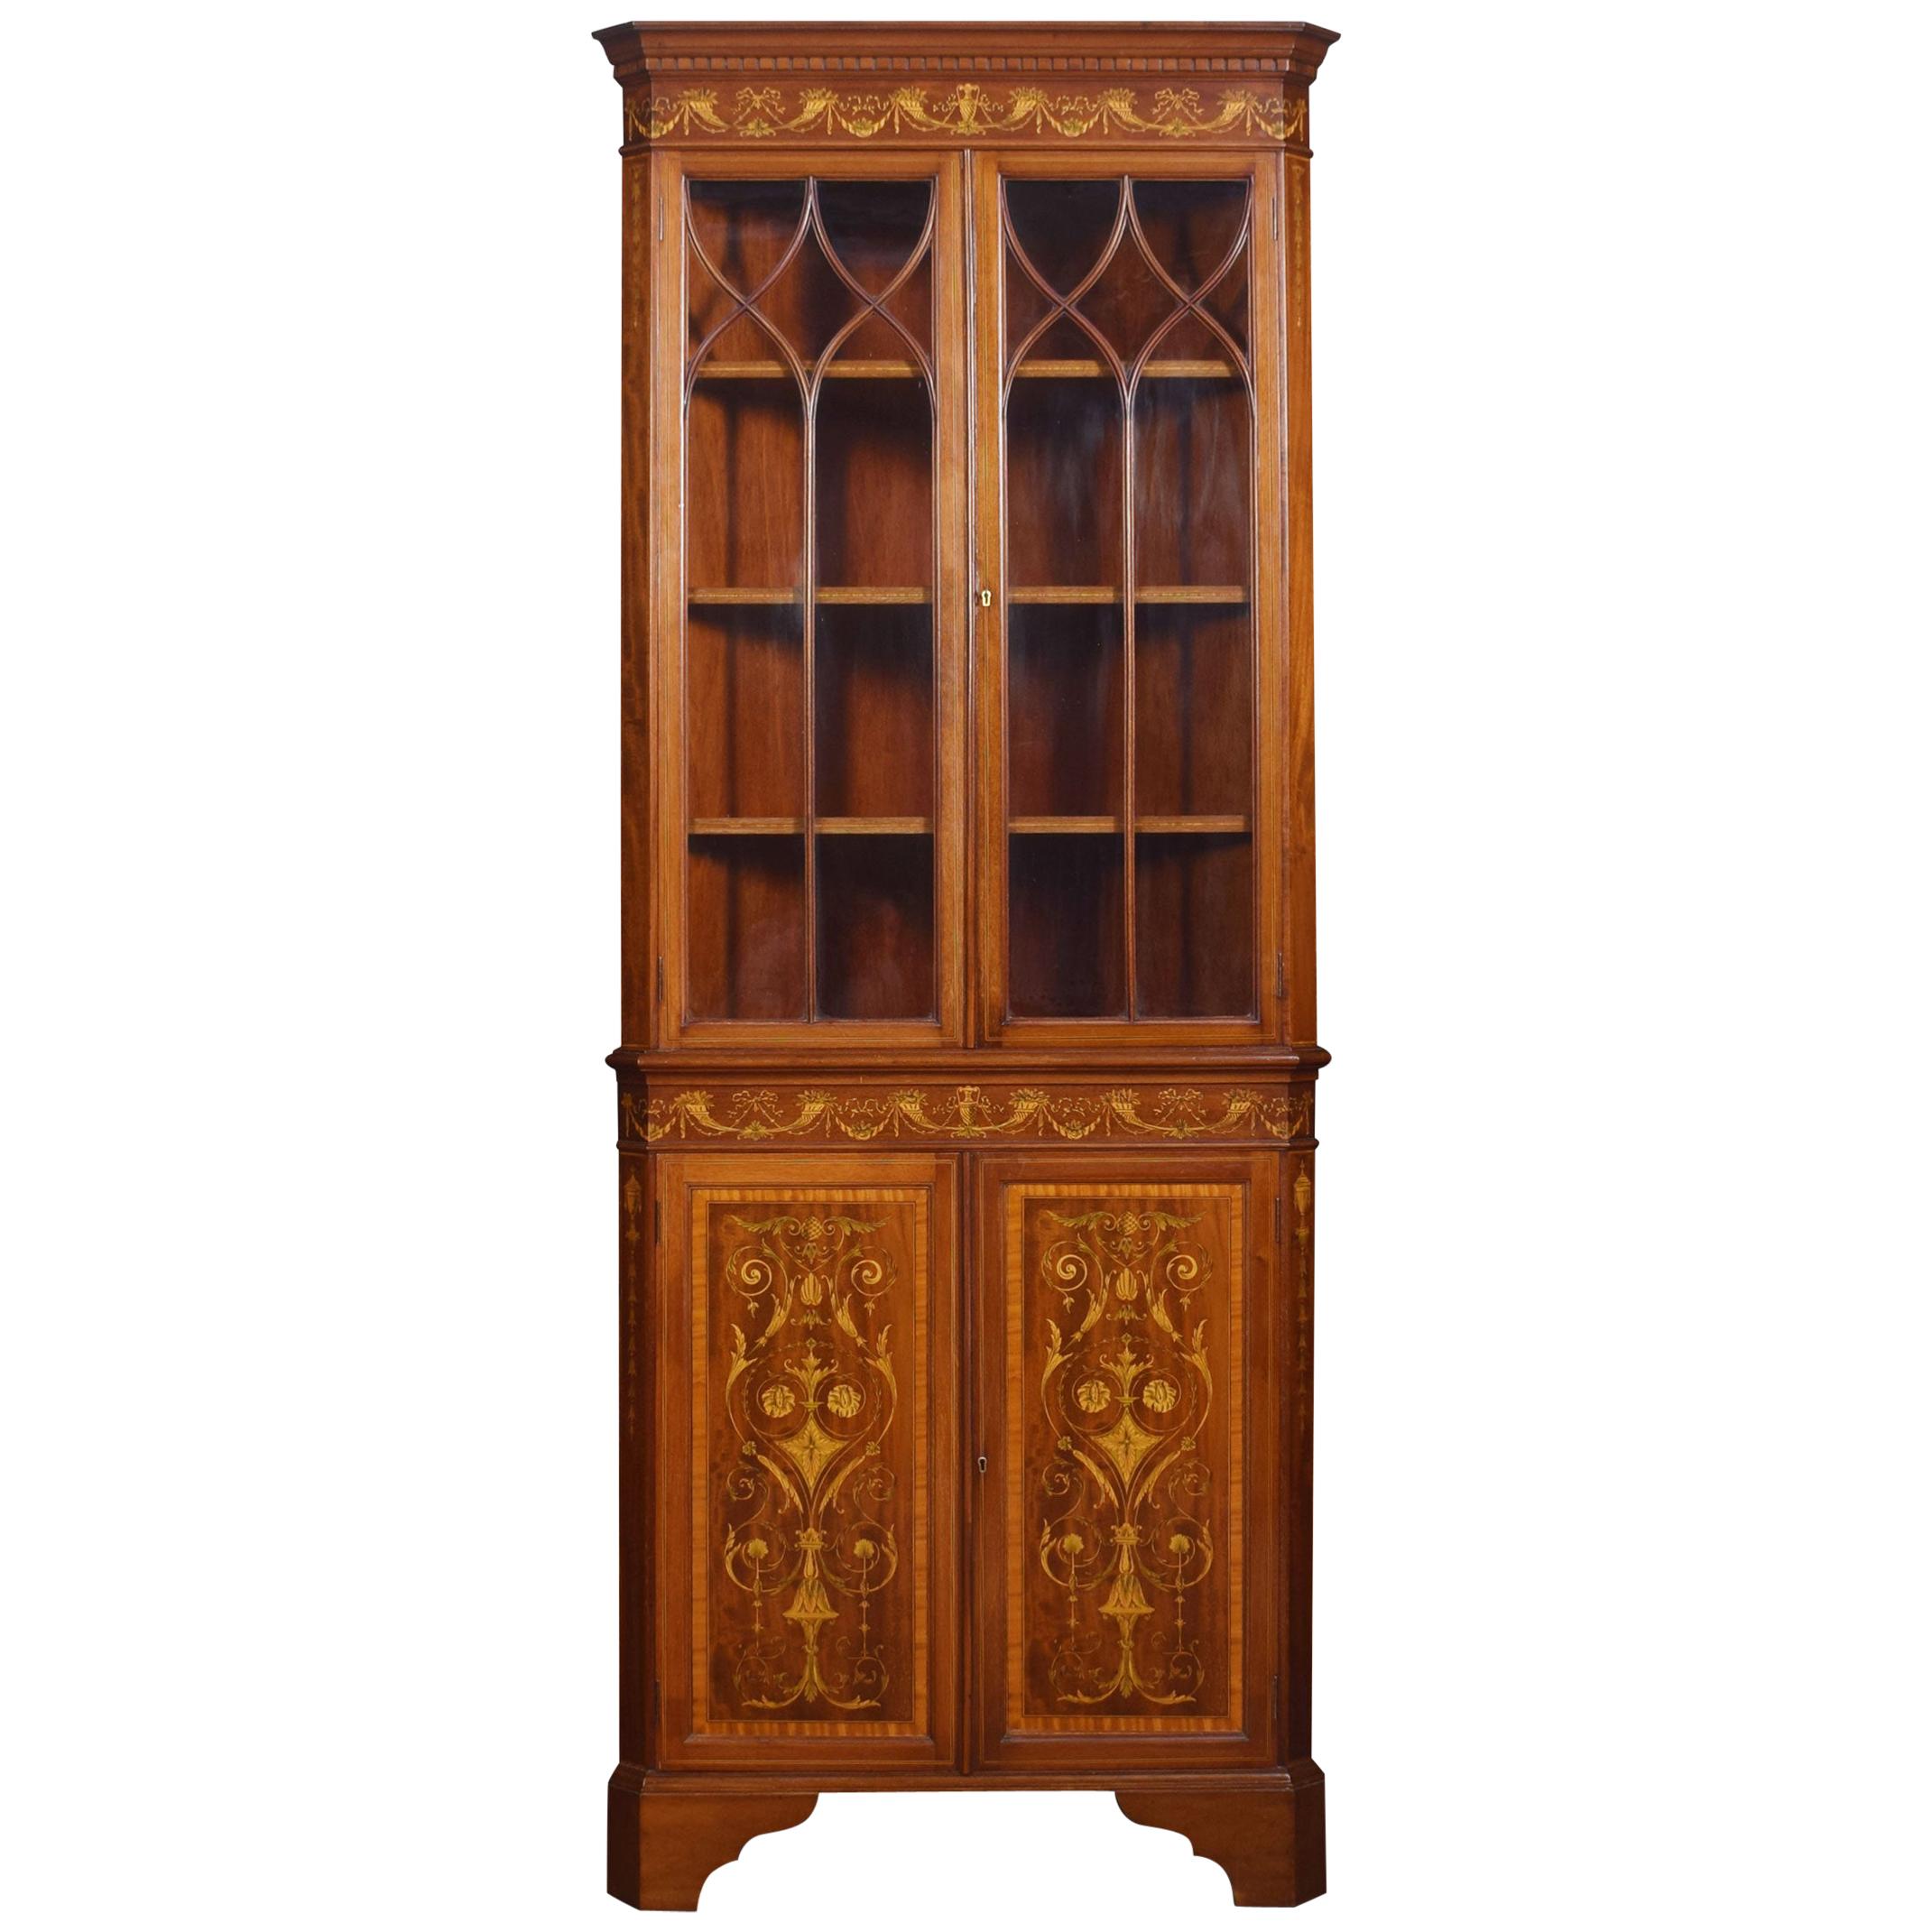 Case Pieces and Storage Cabinets at Auction